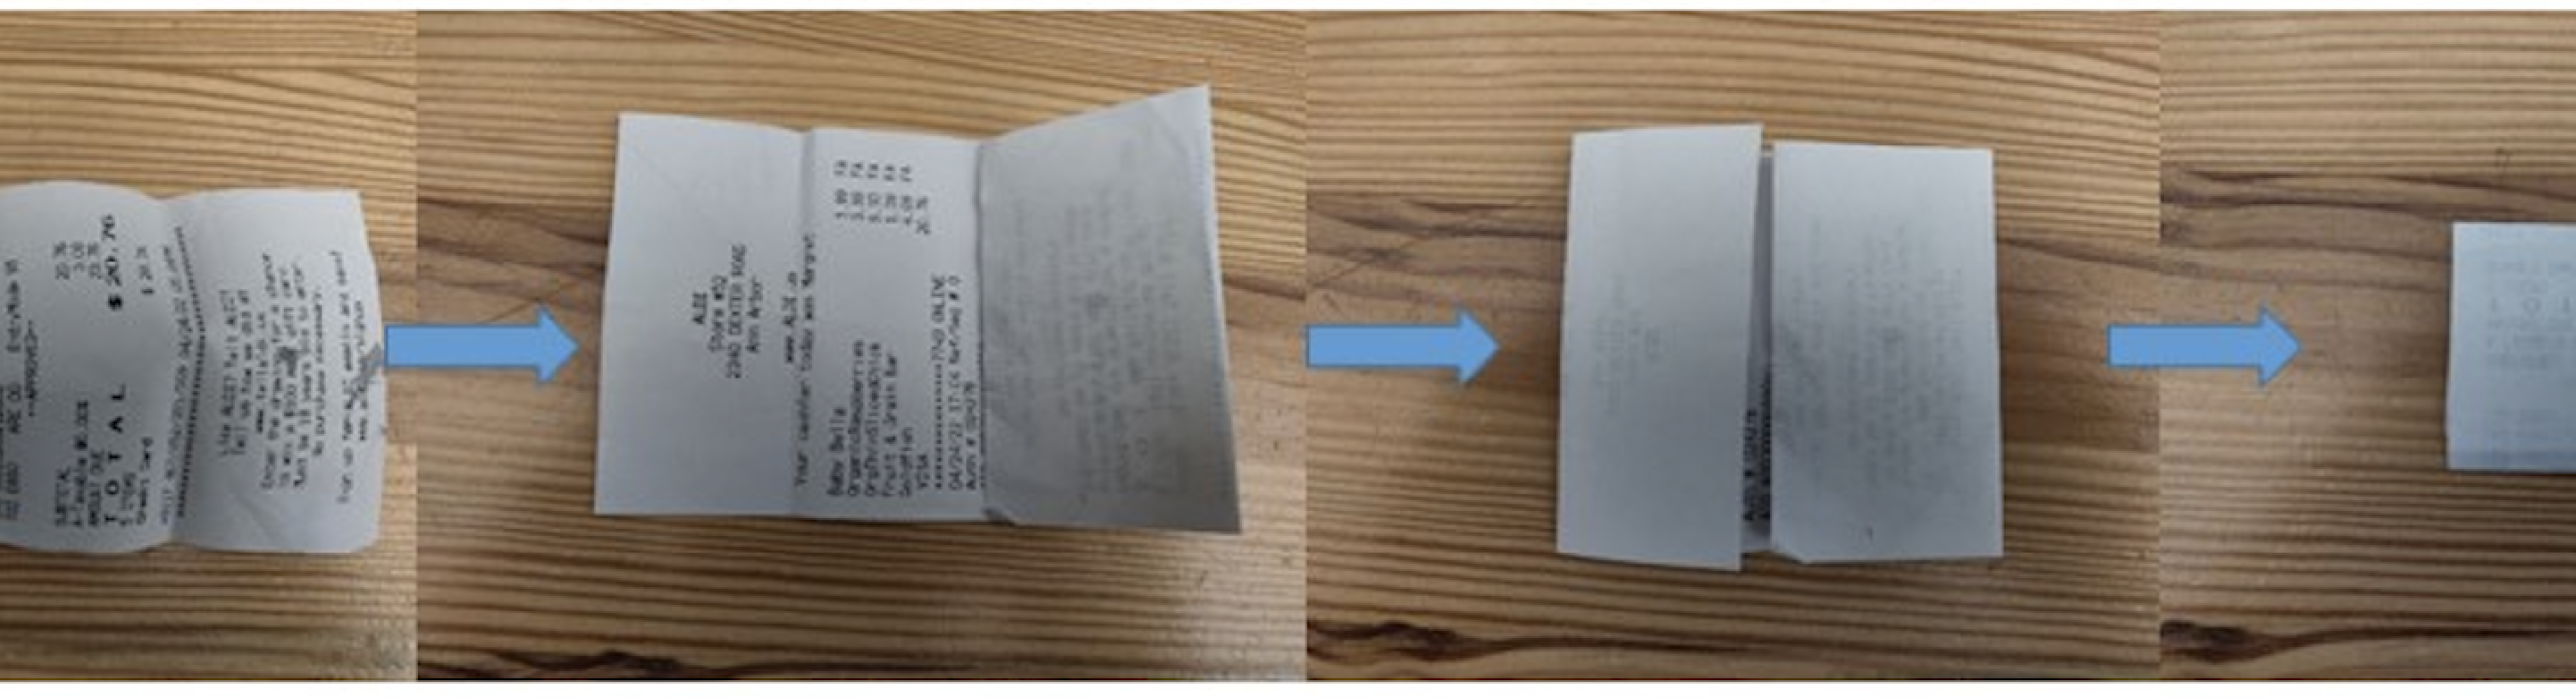 How to fold a receipt